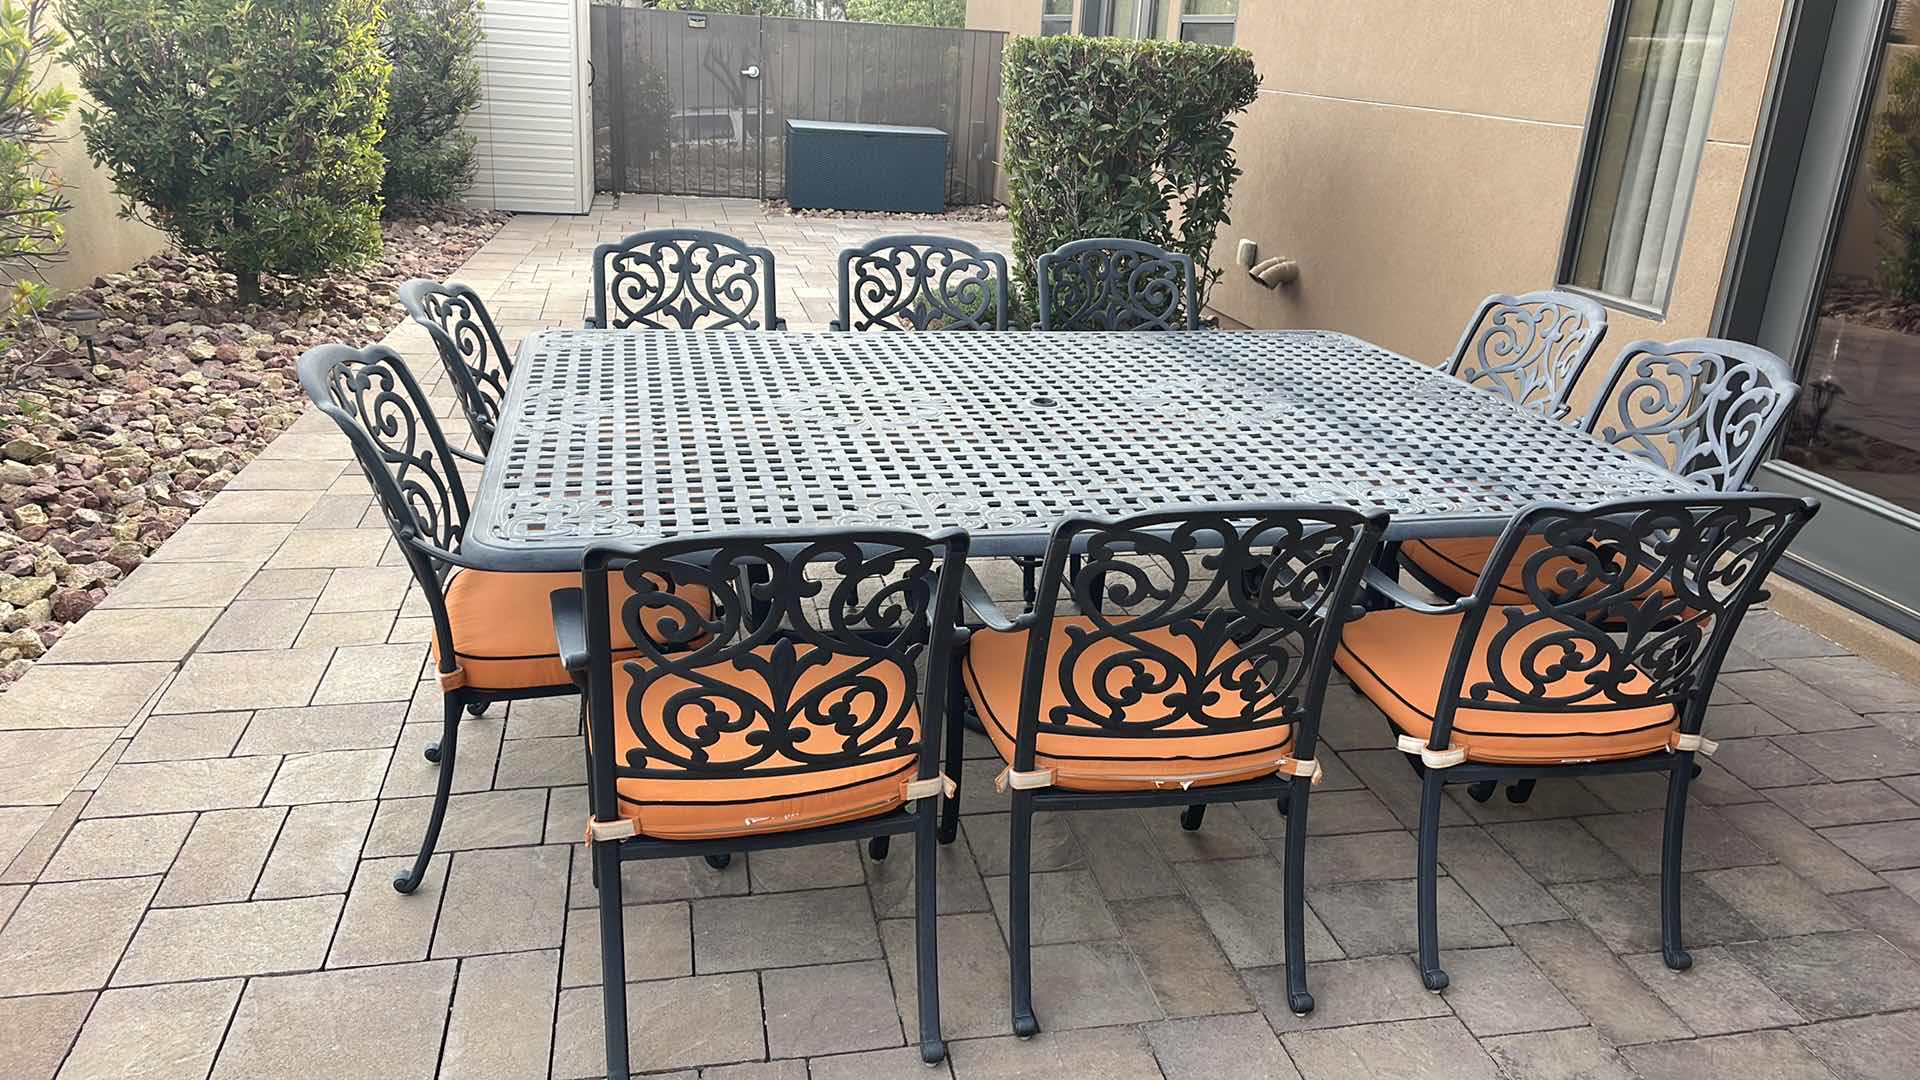 Photo 1 of LUXURY PATIO FURNITURE SET - TABLE 64” X 90” WITH 10 CHAIRS ORANGE CUSHIONS WITH BLACK WELTING